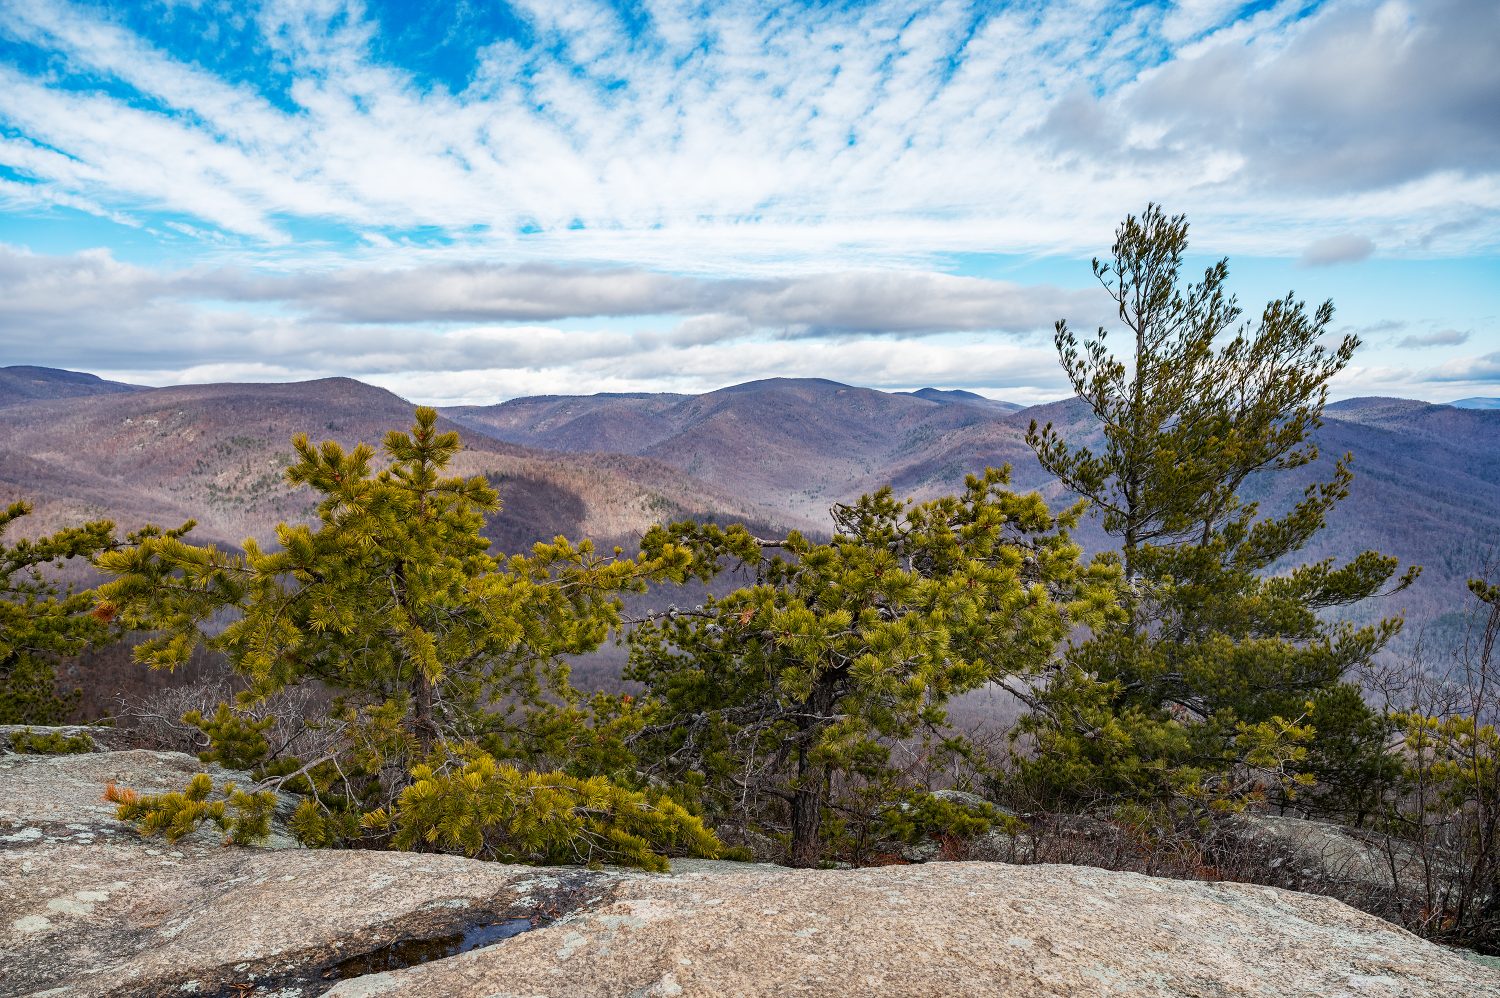 The Best Road Trip Stops From DC to Shenandoah National Park